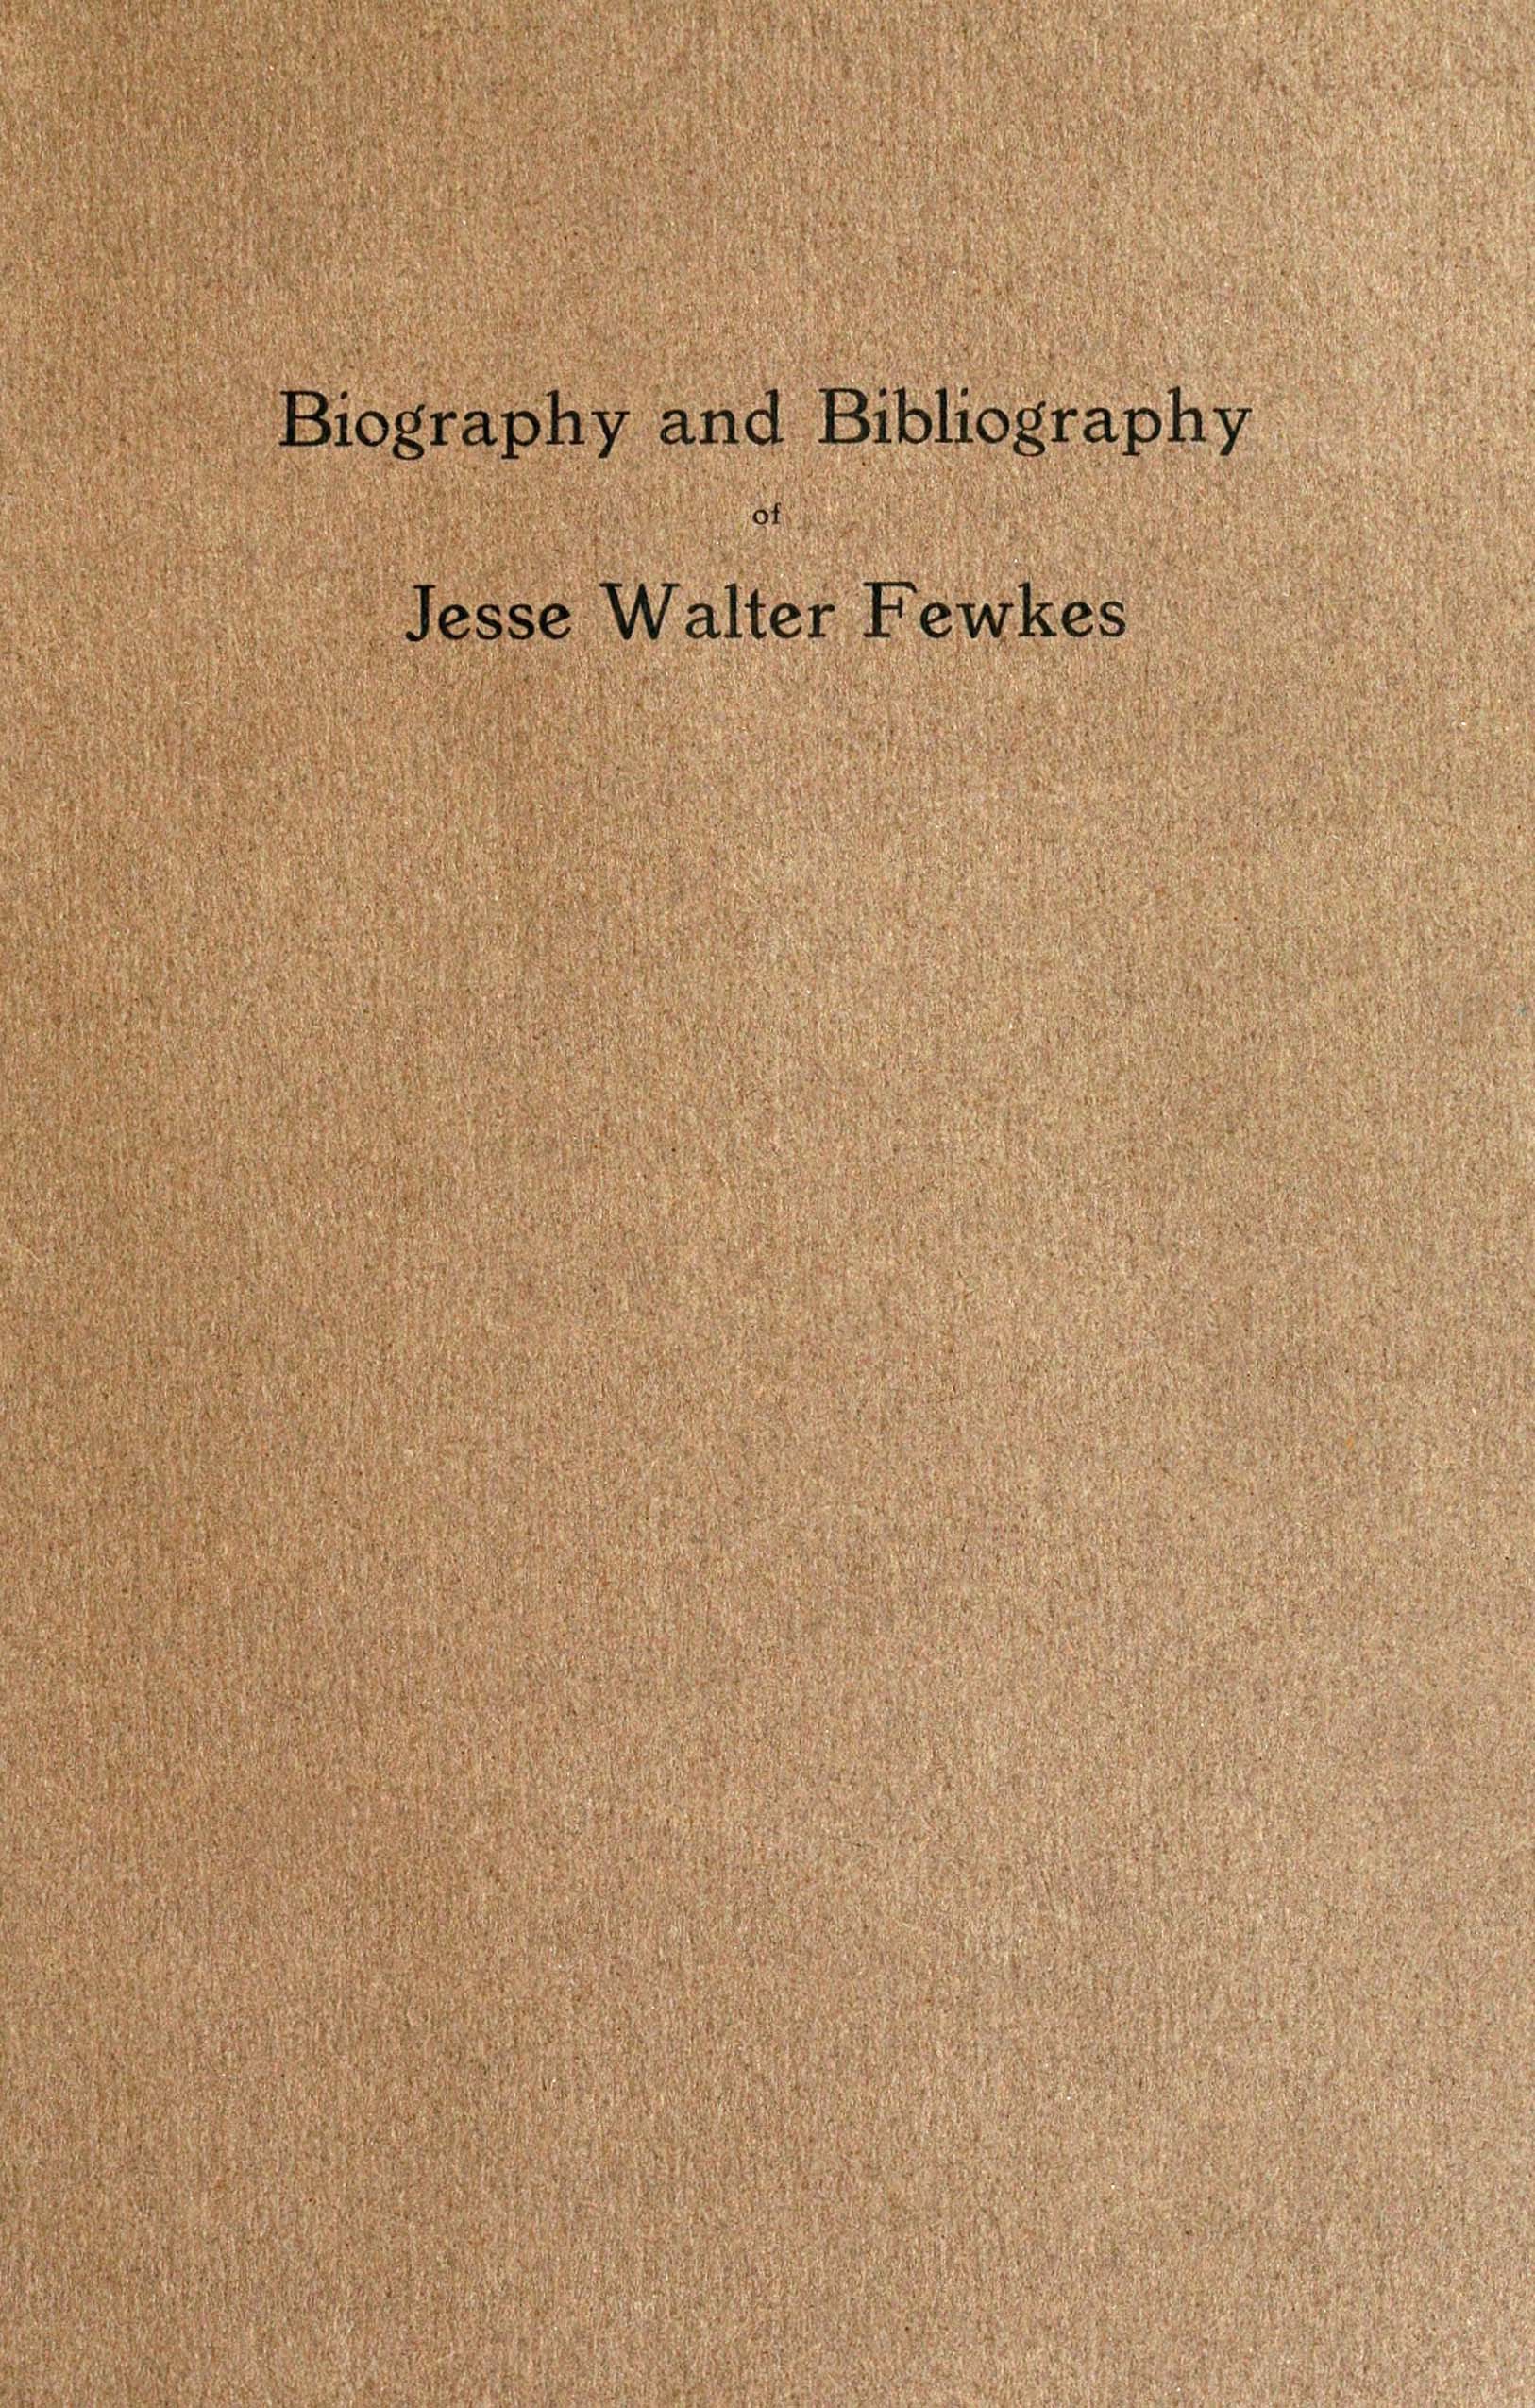 Biography and bibliography of Jesse Walter Fewkes